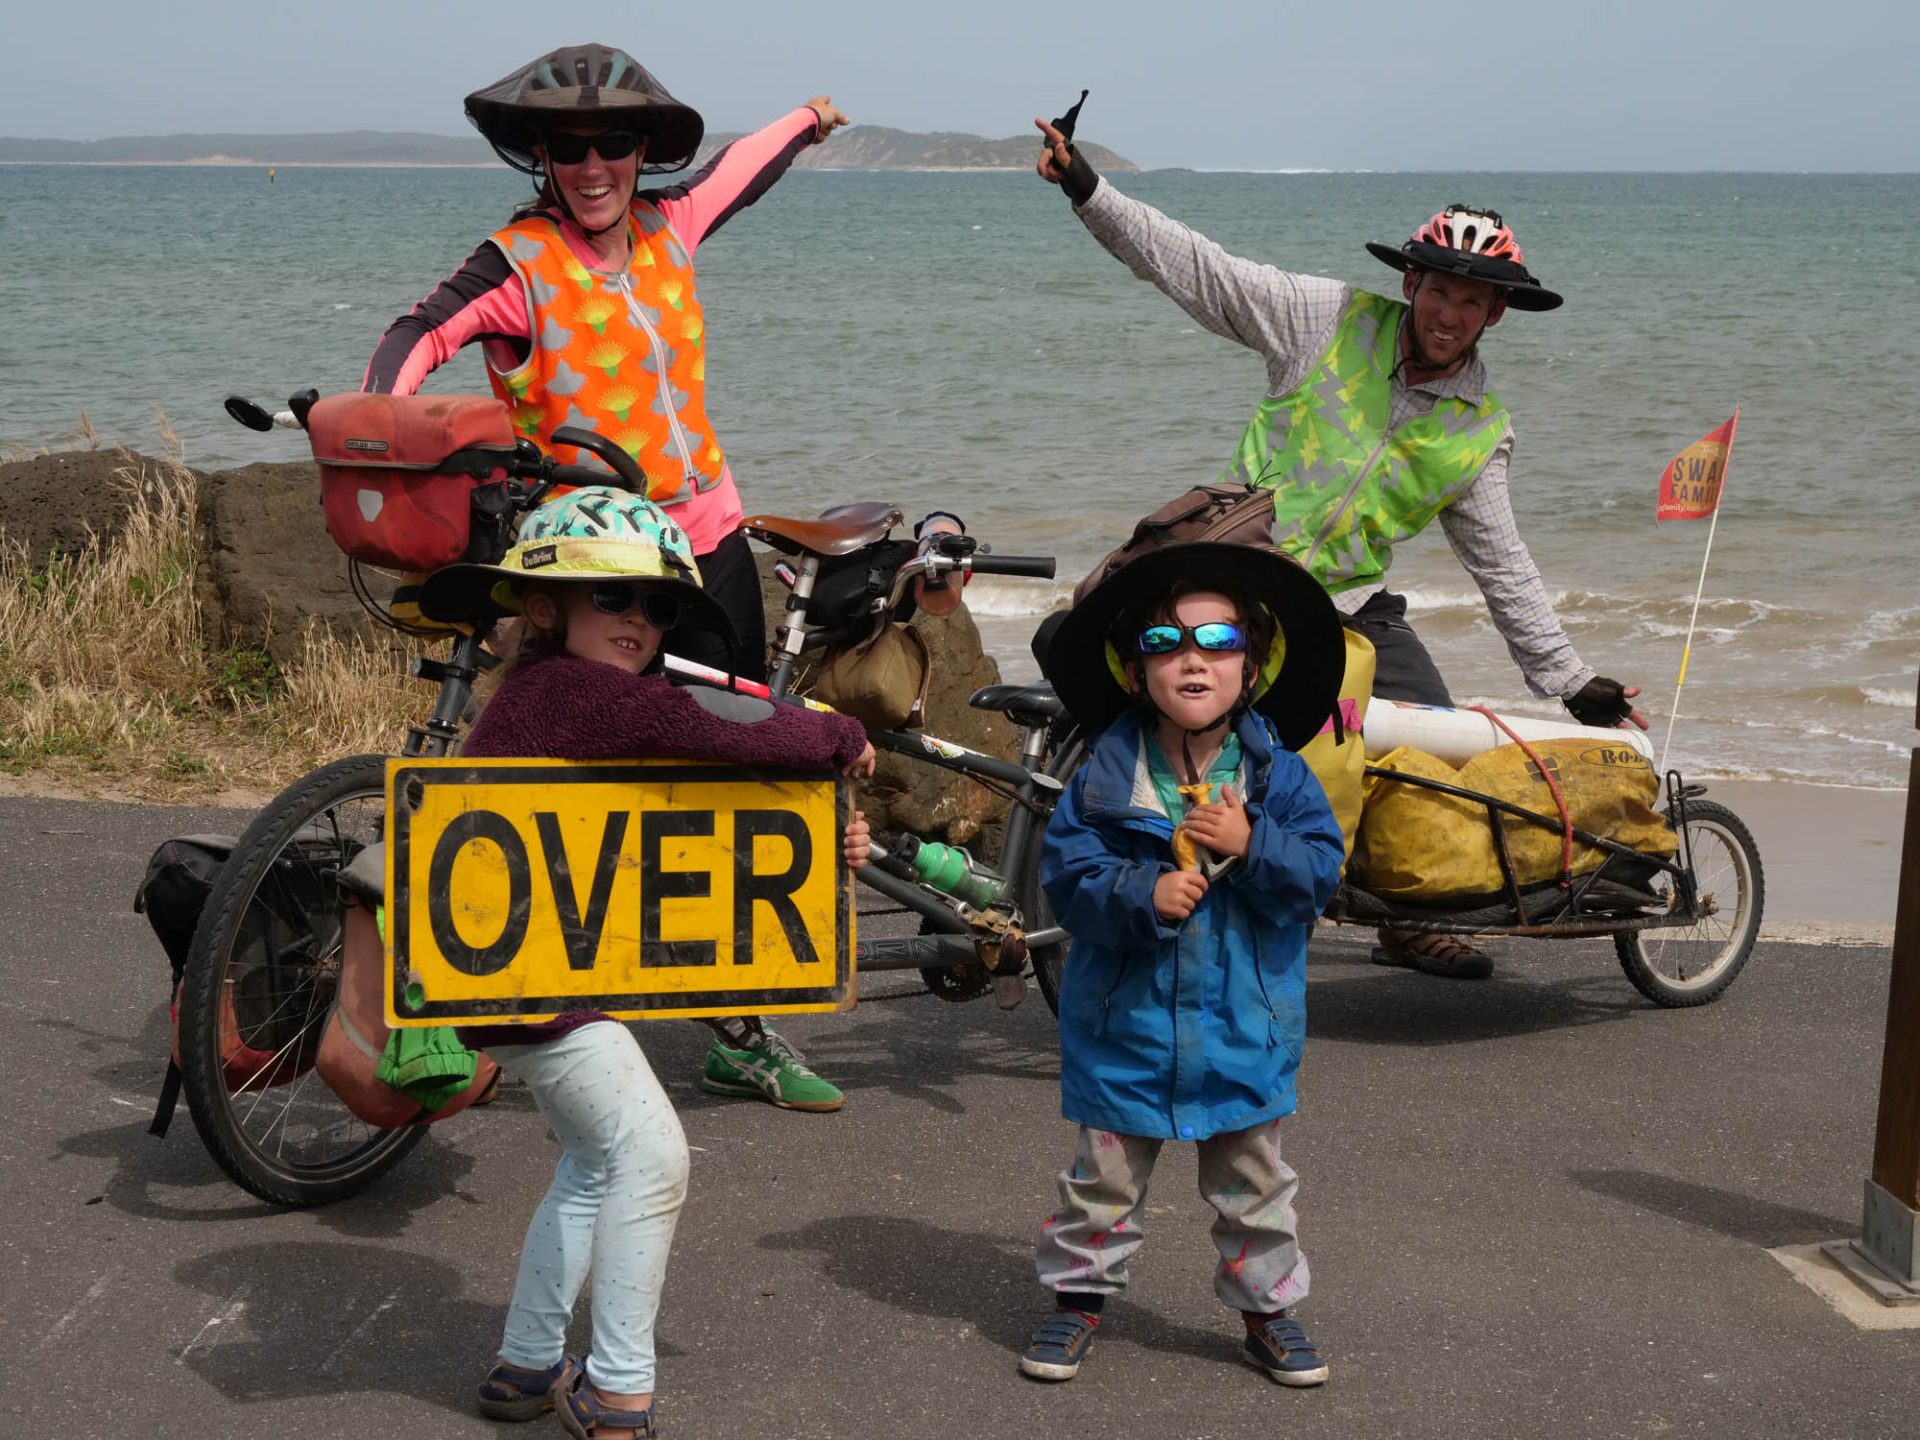 The family poses, presumably near the end of their journey, with Hope holding a sign that says 'OVER'. 